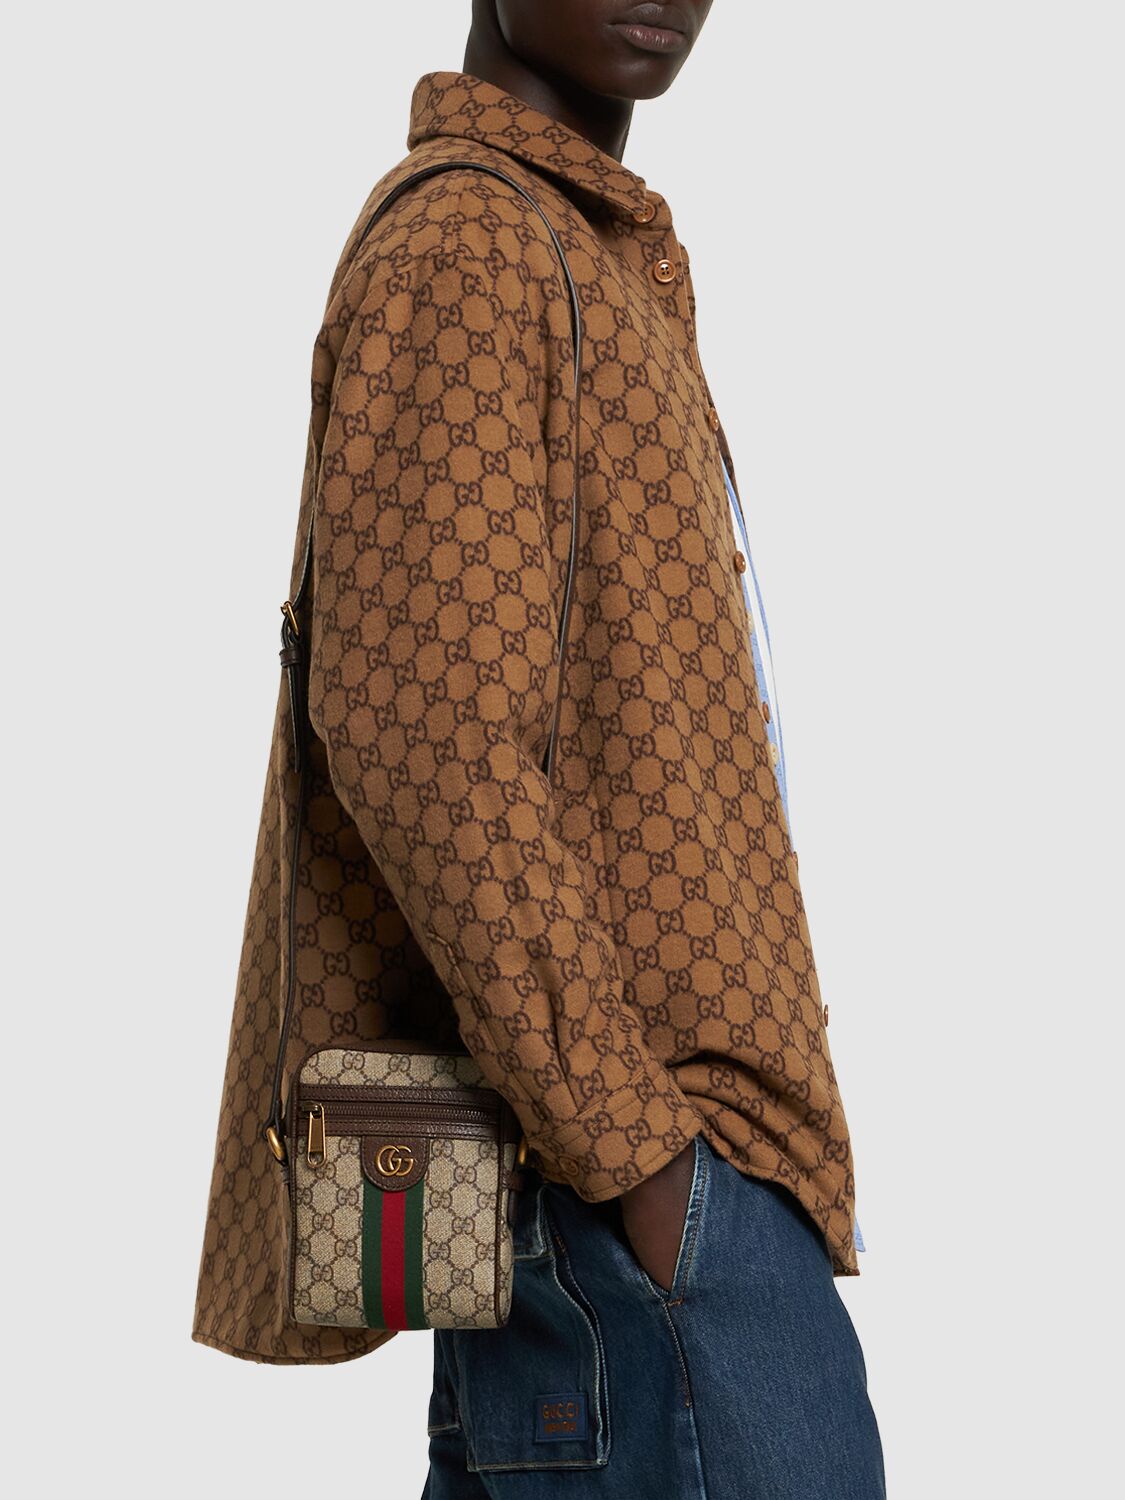  Gucci Ophidia Gg Supreme Coated Canvas Bag 